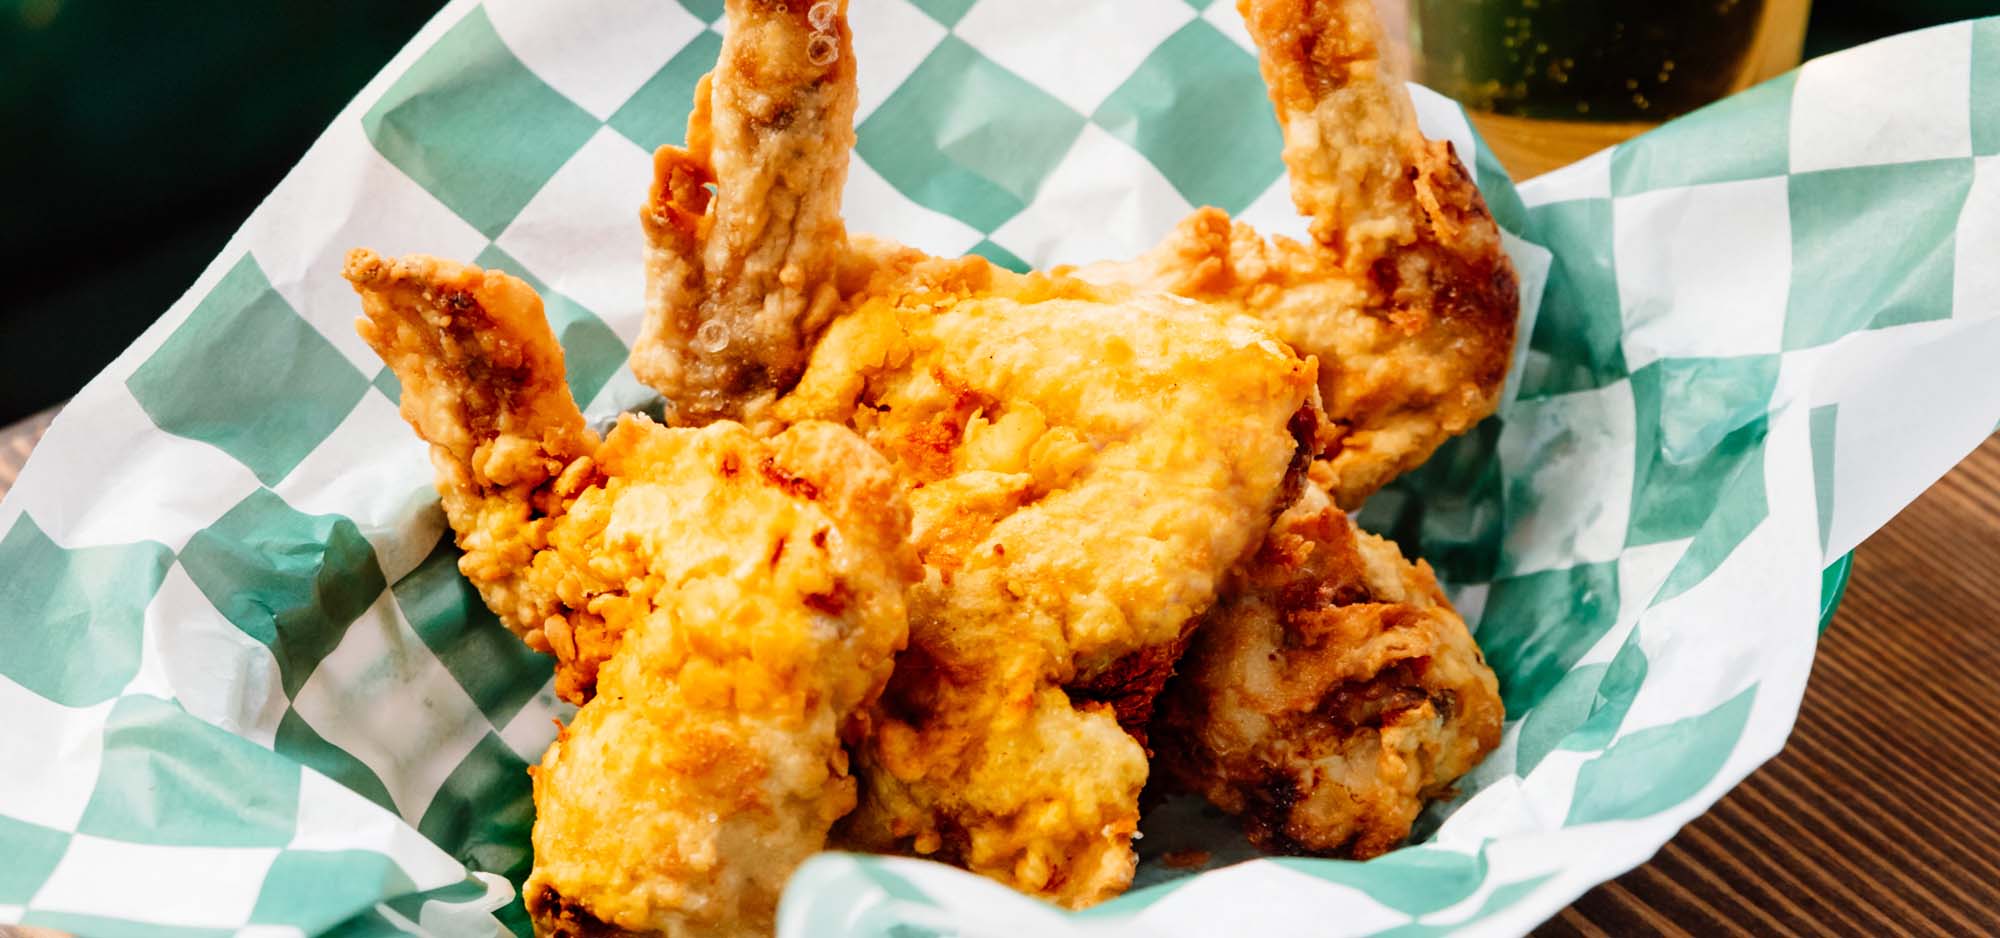 A basket of fried chicken wings on green check parchment paper.